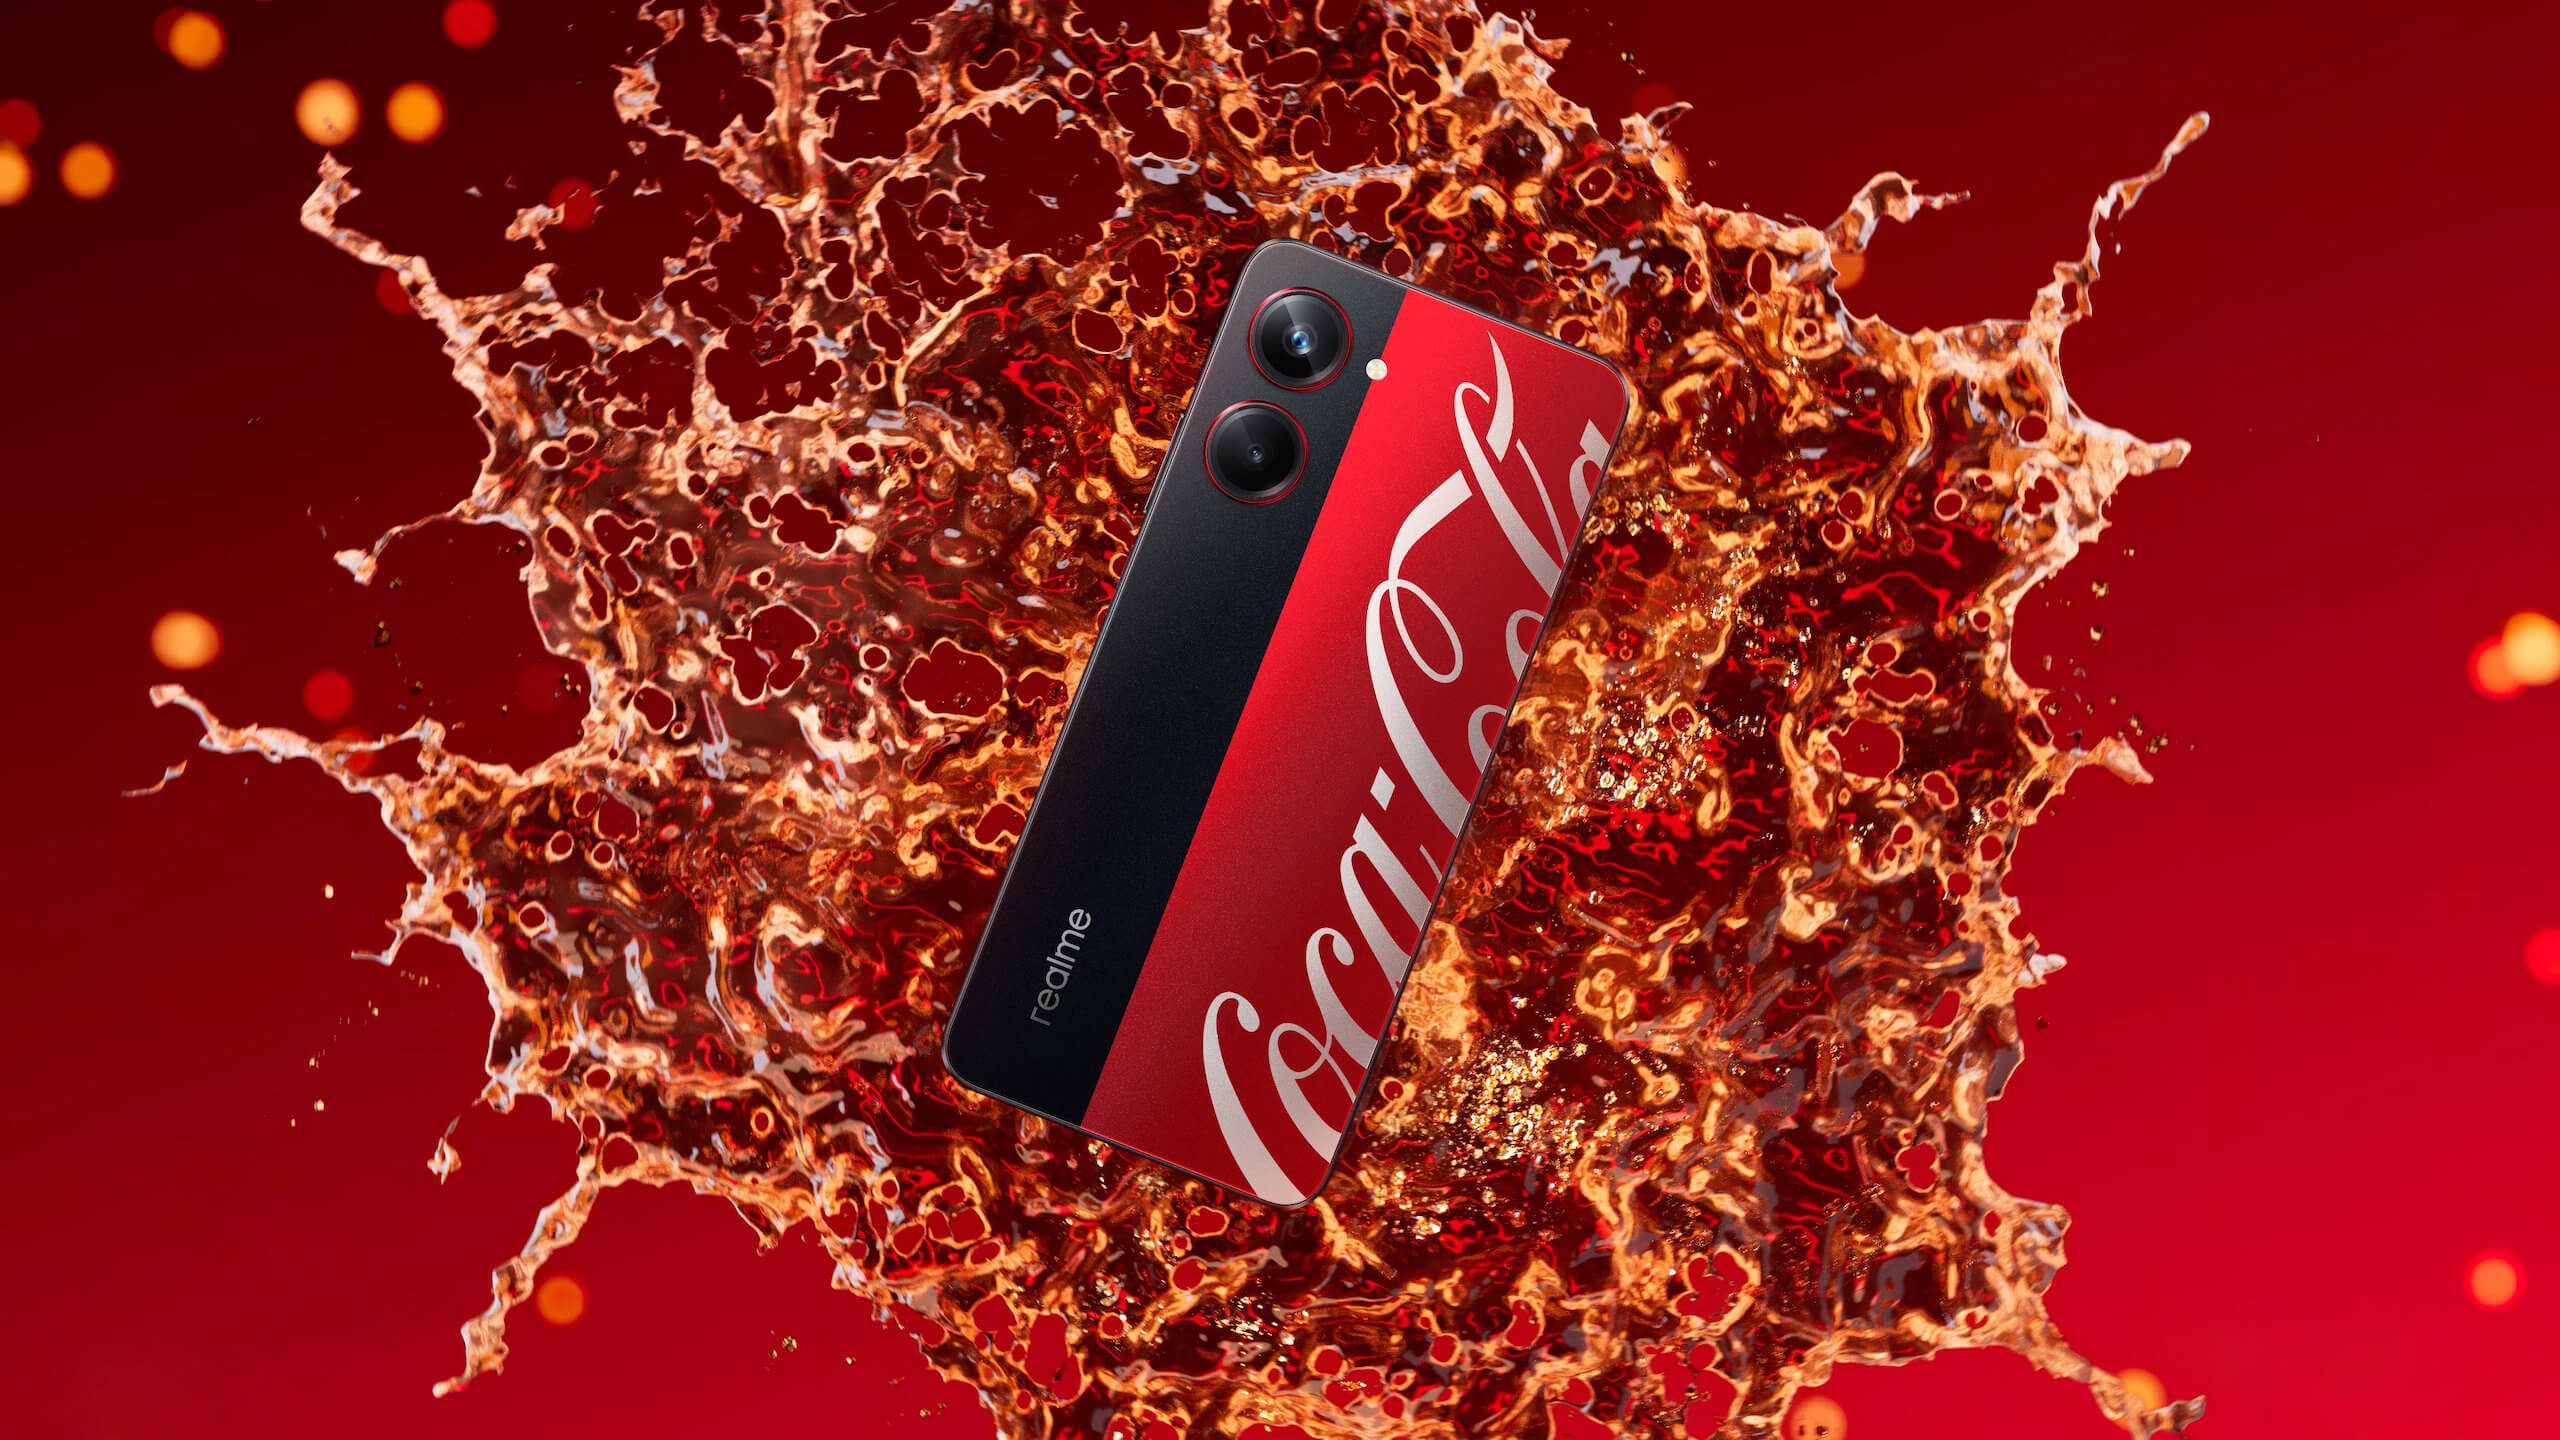 Bite into the Fun: Coca Cola Gallery Brings You the Sexiest Cellphone Designs